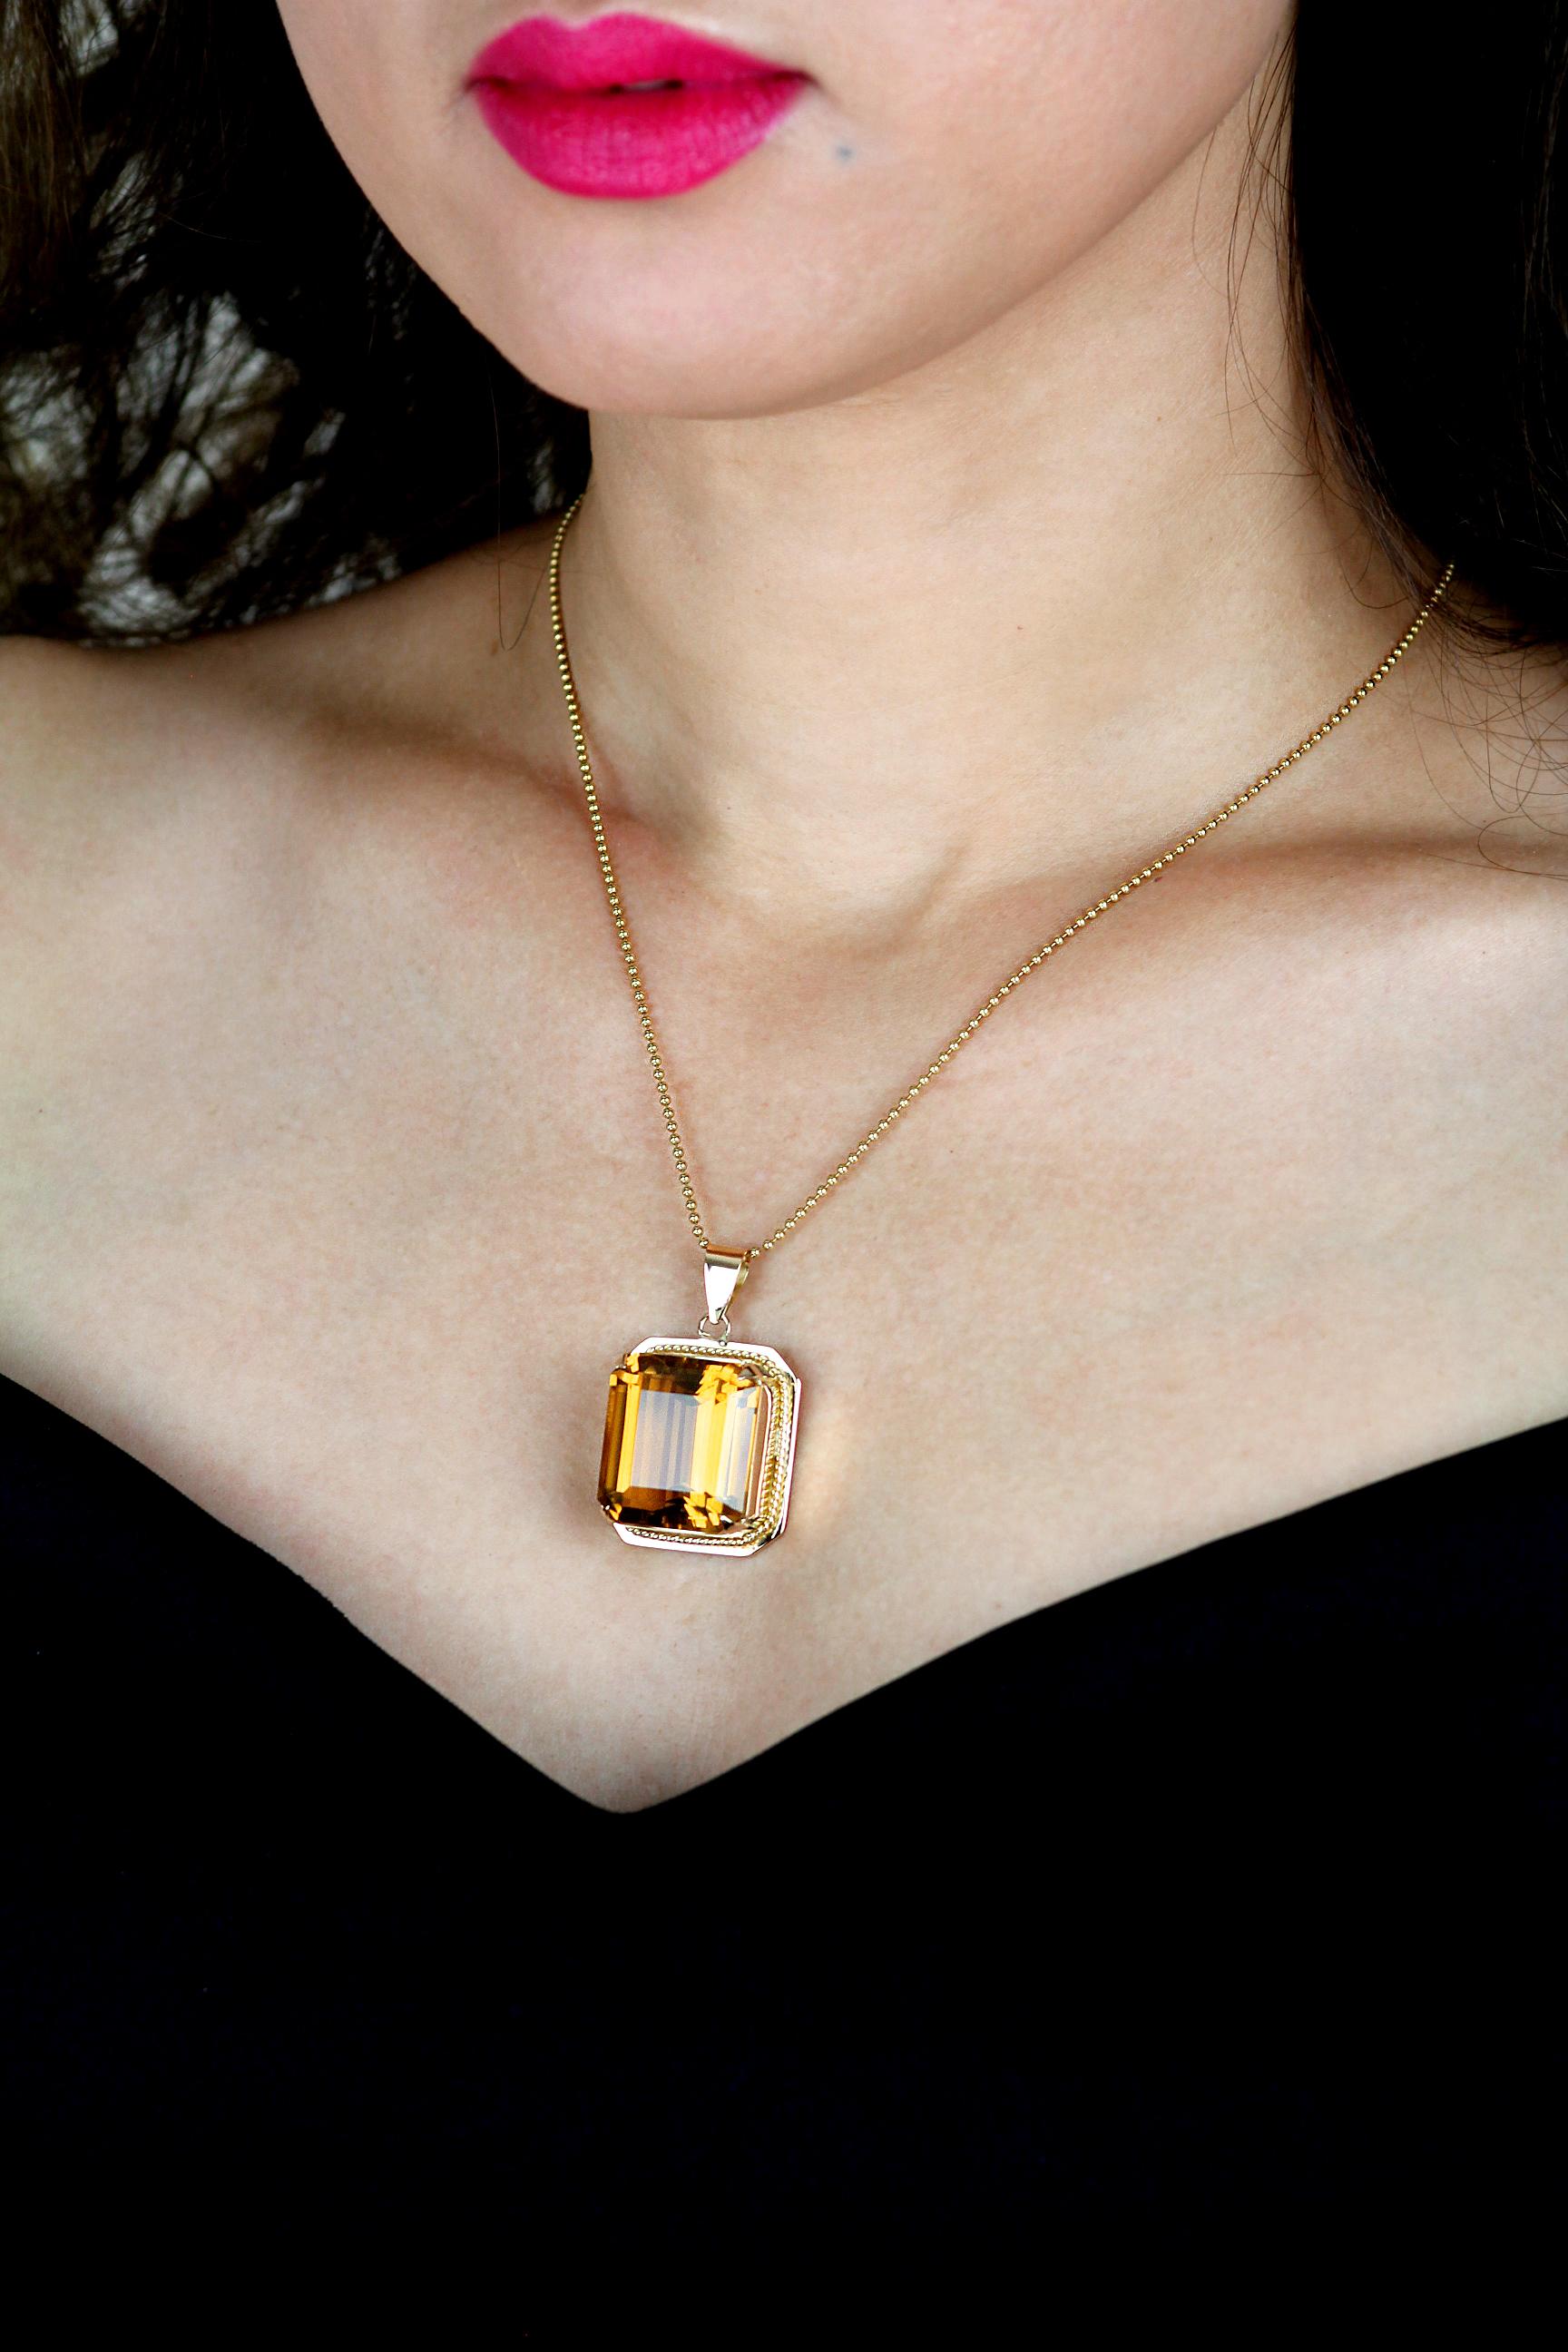 Beautifully composed citrine pendant in 18 carat yellow gold. It features a luxurious glowing fiery yellow orange citrine in a rectangular emerald cut, bordered with a stunning yellow gold rope twist border, and yellow gold pendant bail. The citrine